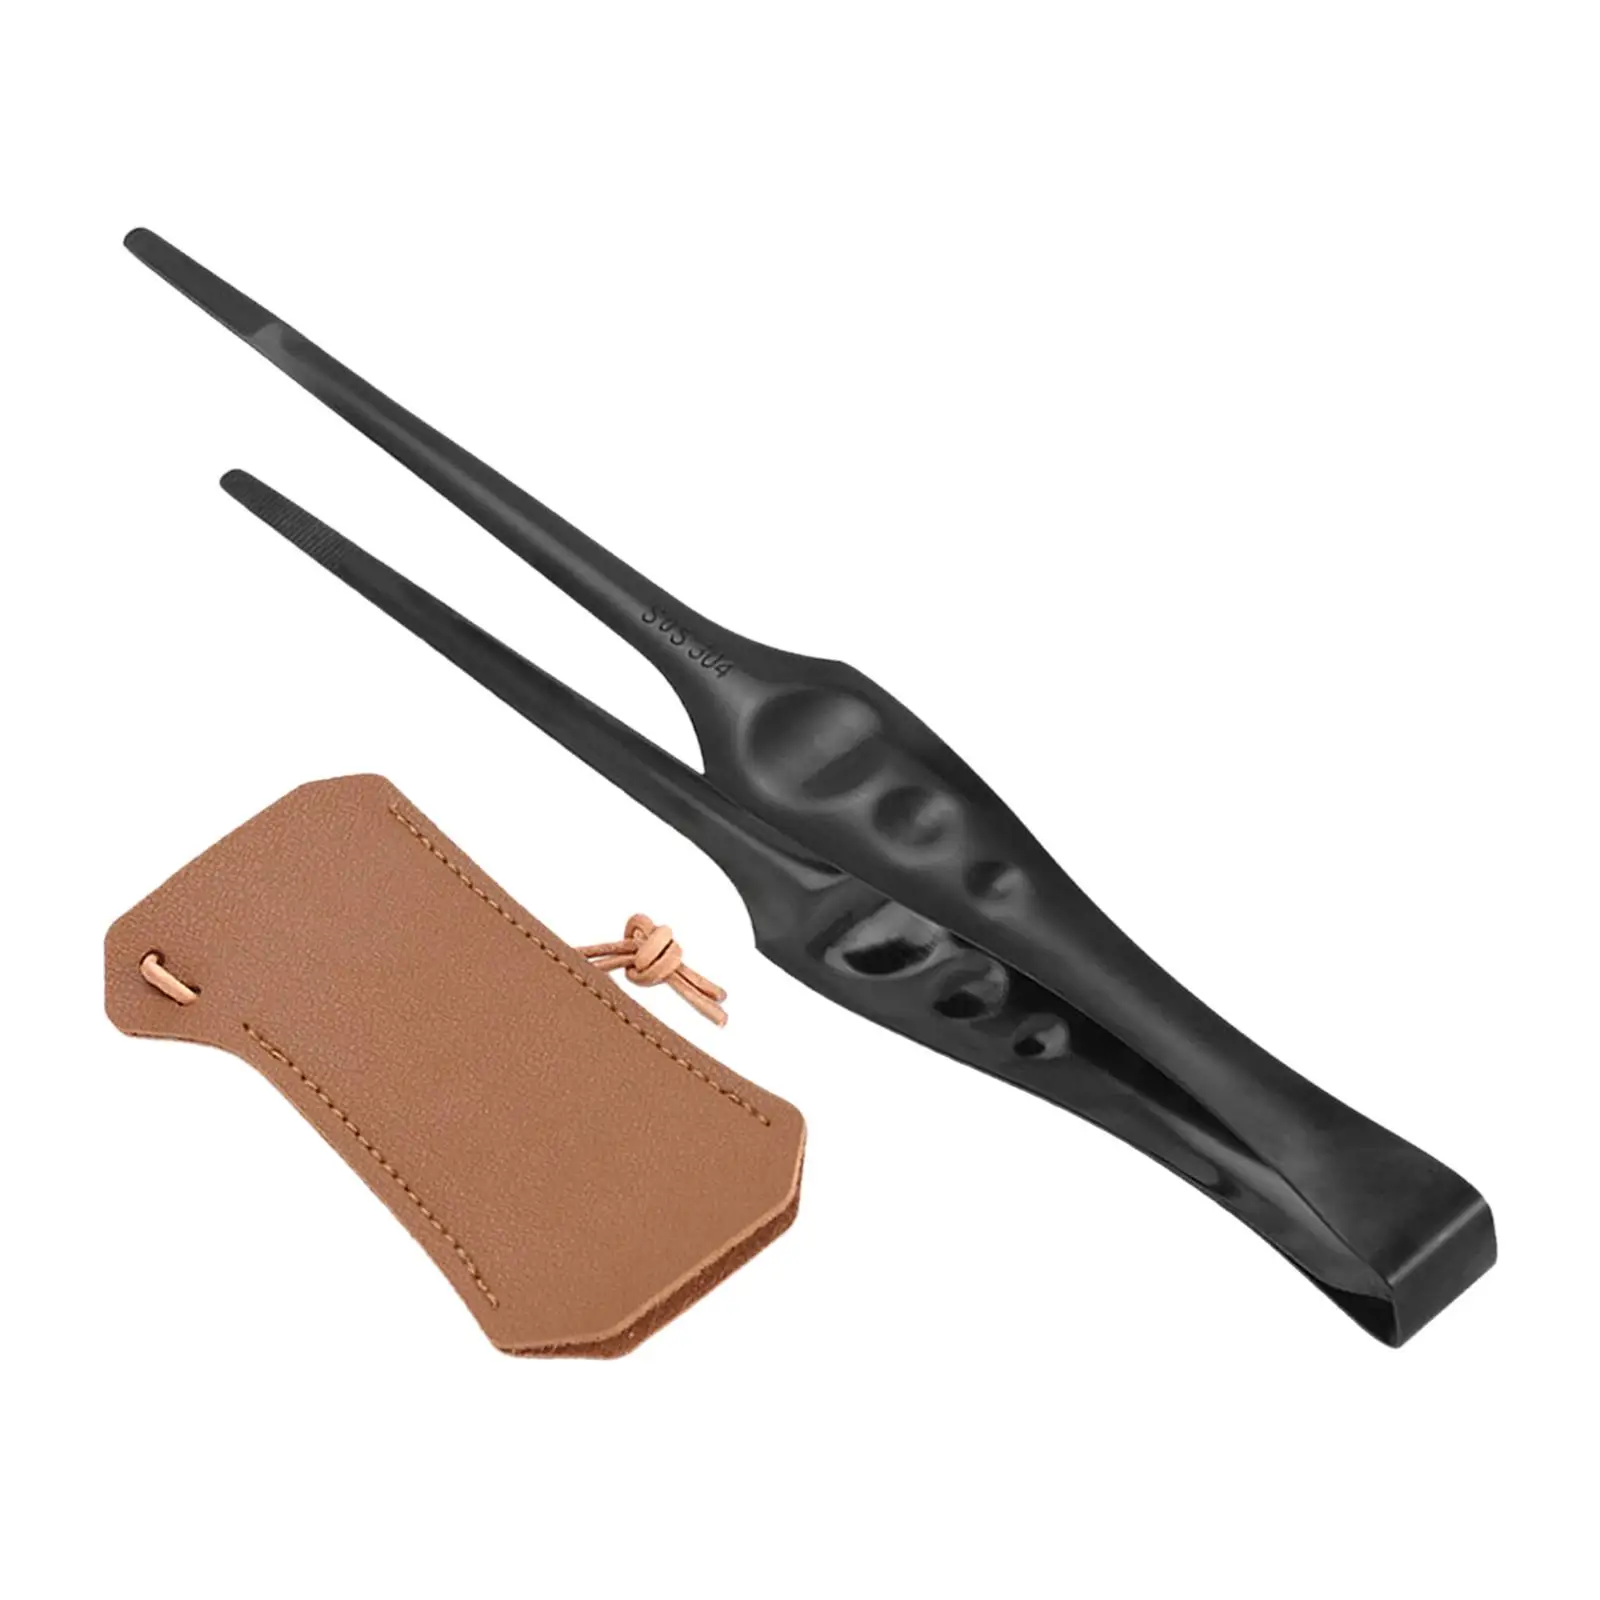 Stainless Steel Grill Tongs with PU Leather Sleeve Case Nonslip Grip Kitchen Tongs for Baking BBQ Buffet Food Parties Camping